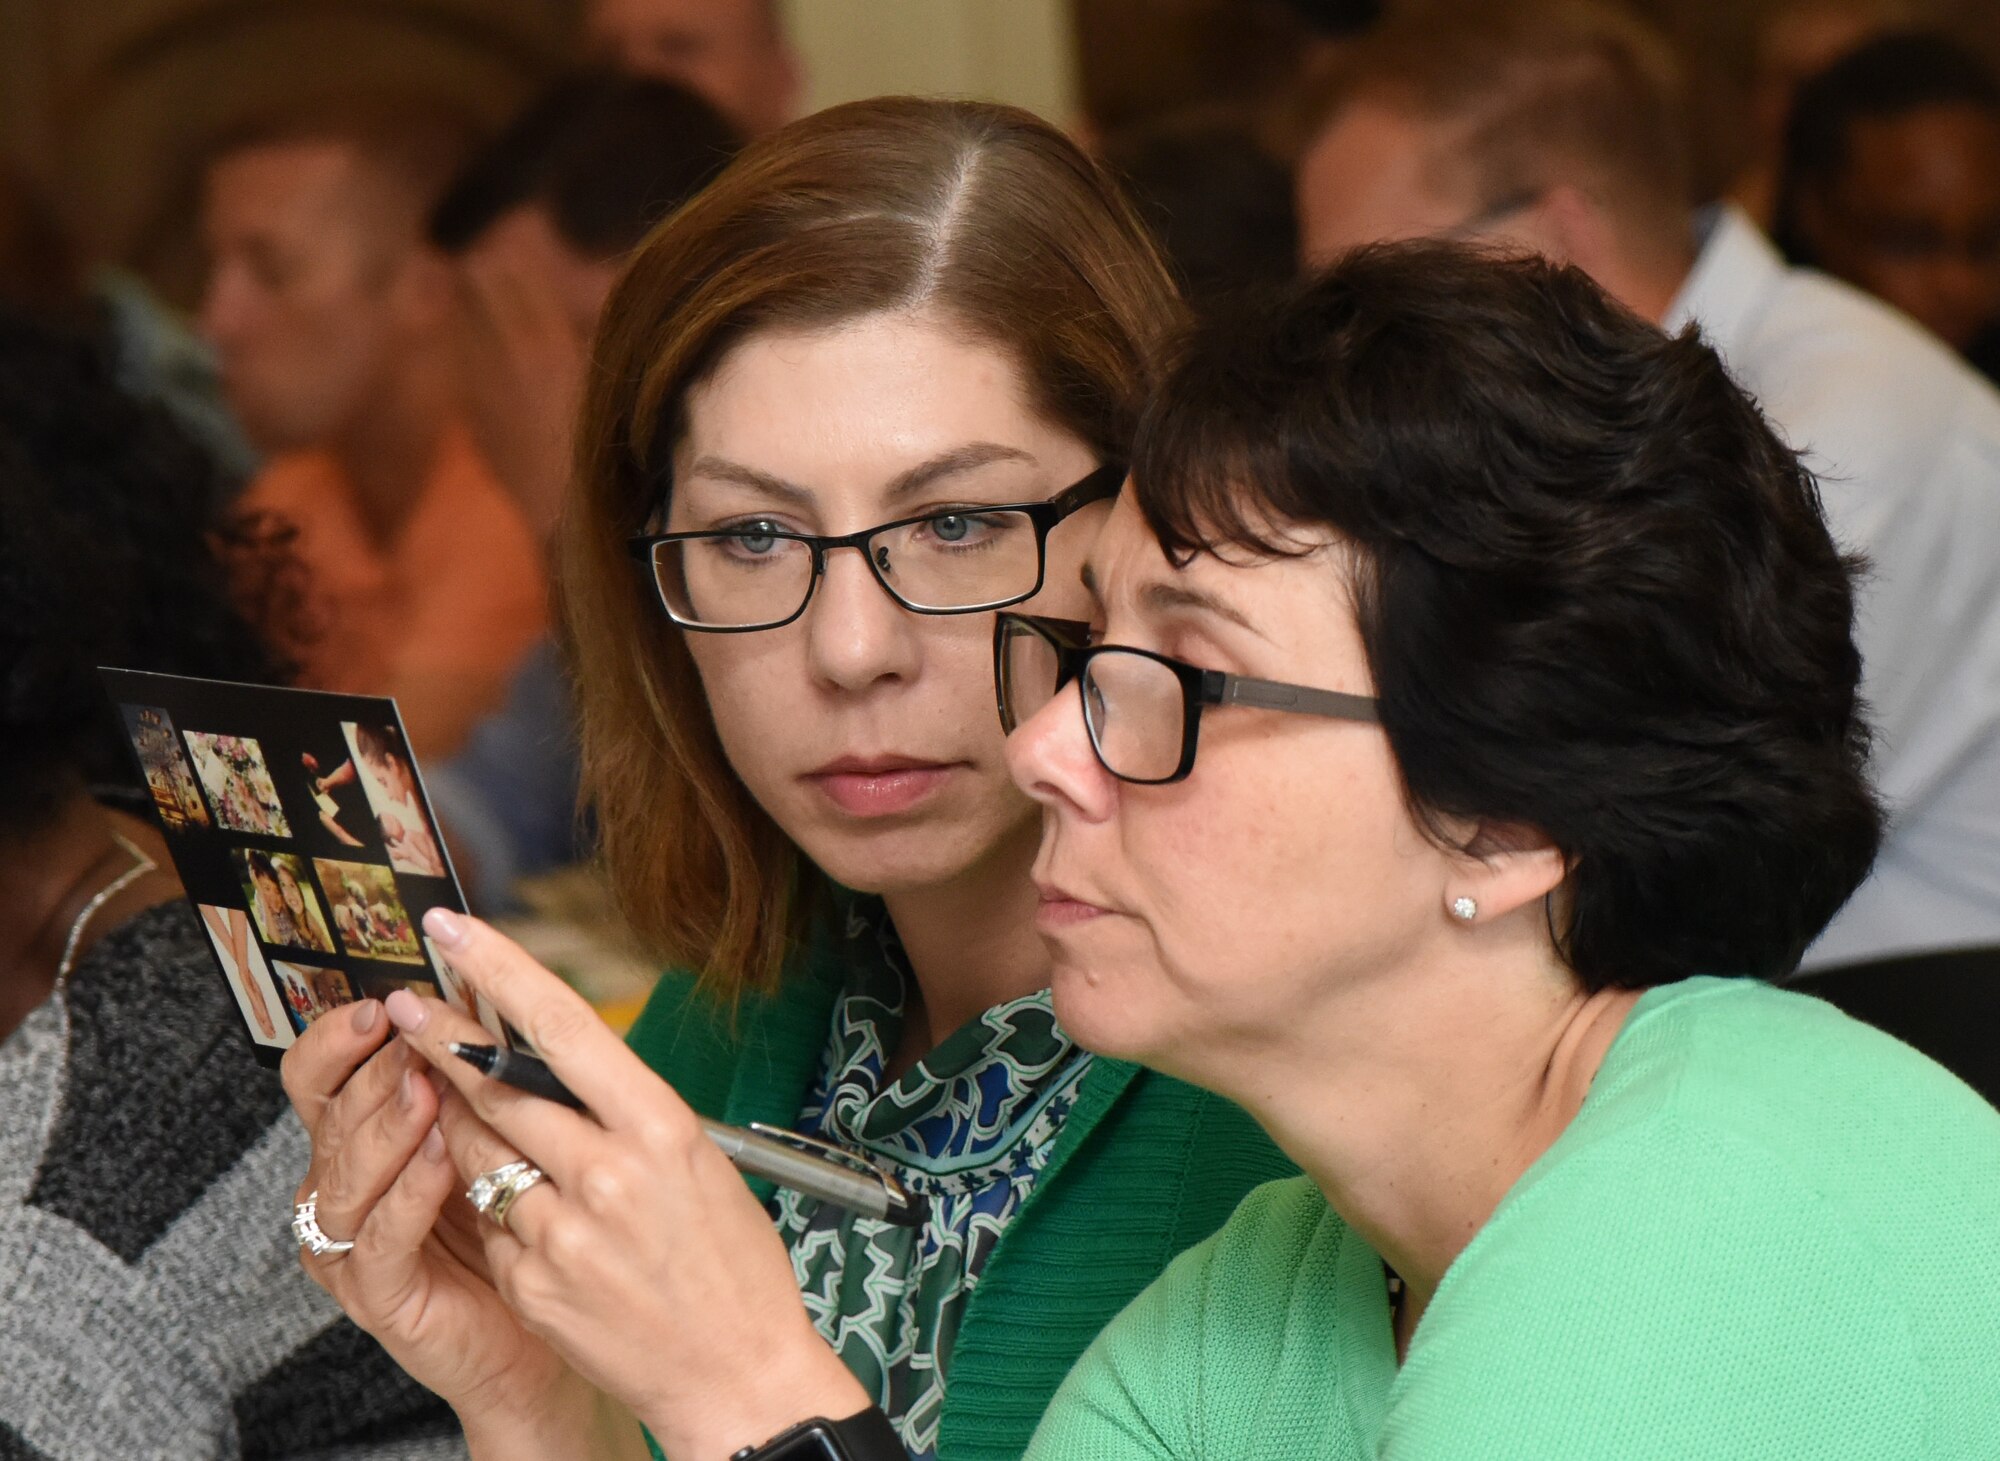 U.S. Air Force Chief Master Sgt. Julie Bottroff, 81st Medical Group superintendent, and Col. Jeannine Ryder, 81st MDG commander, participate in a personality assessment project during the 81st Training Wing Spring 2018 Off-Site Commander’s Conference at The Salvation Army Kroc Center in Biloxi, Mississippi, May 2, 2018. Keesler leadership participated in the two-day event that allowed senior leaders to step away from their day-to-day activities and focus on improving themselves as leaders. (U.S. Air Force photo by Kemberly Groue)